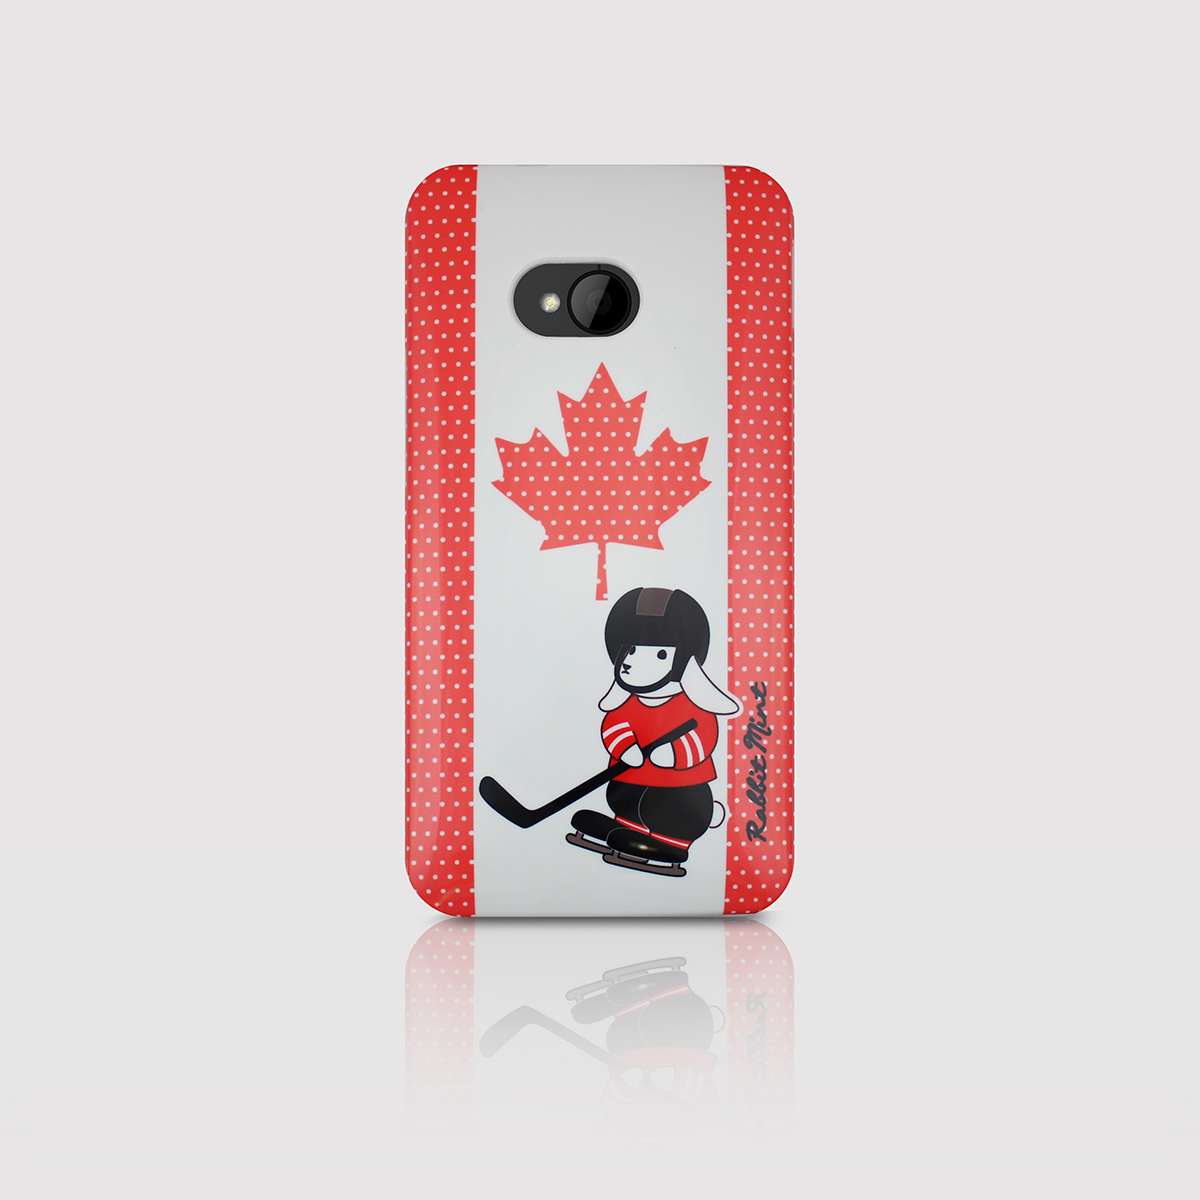 Htc One Case - Bunny Love Travel - Canada (p00060)